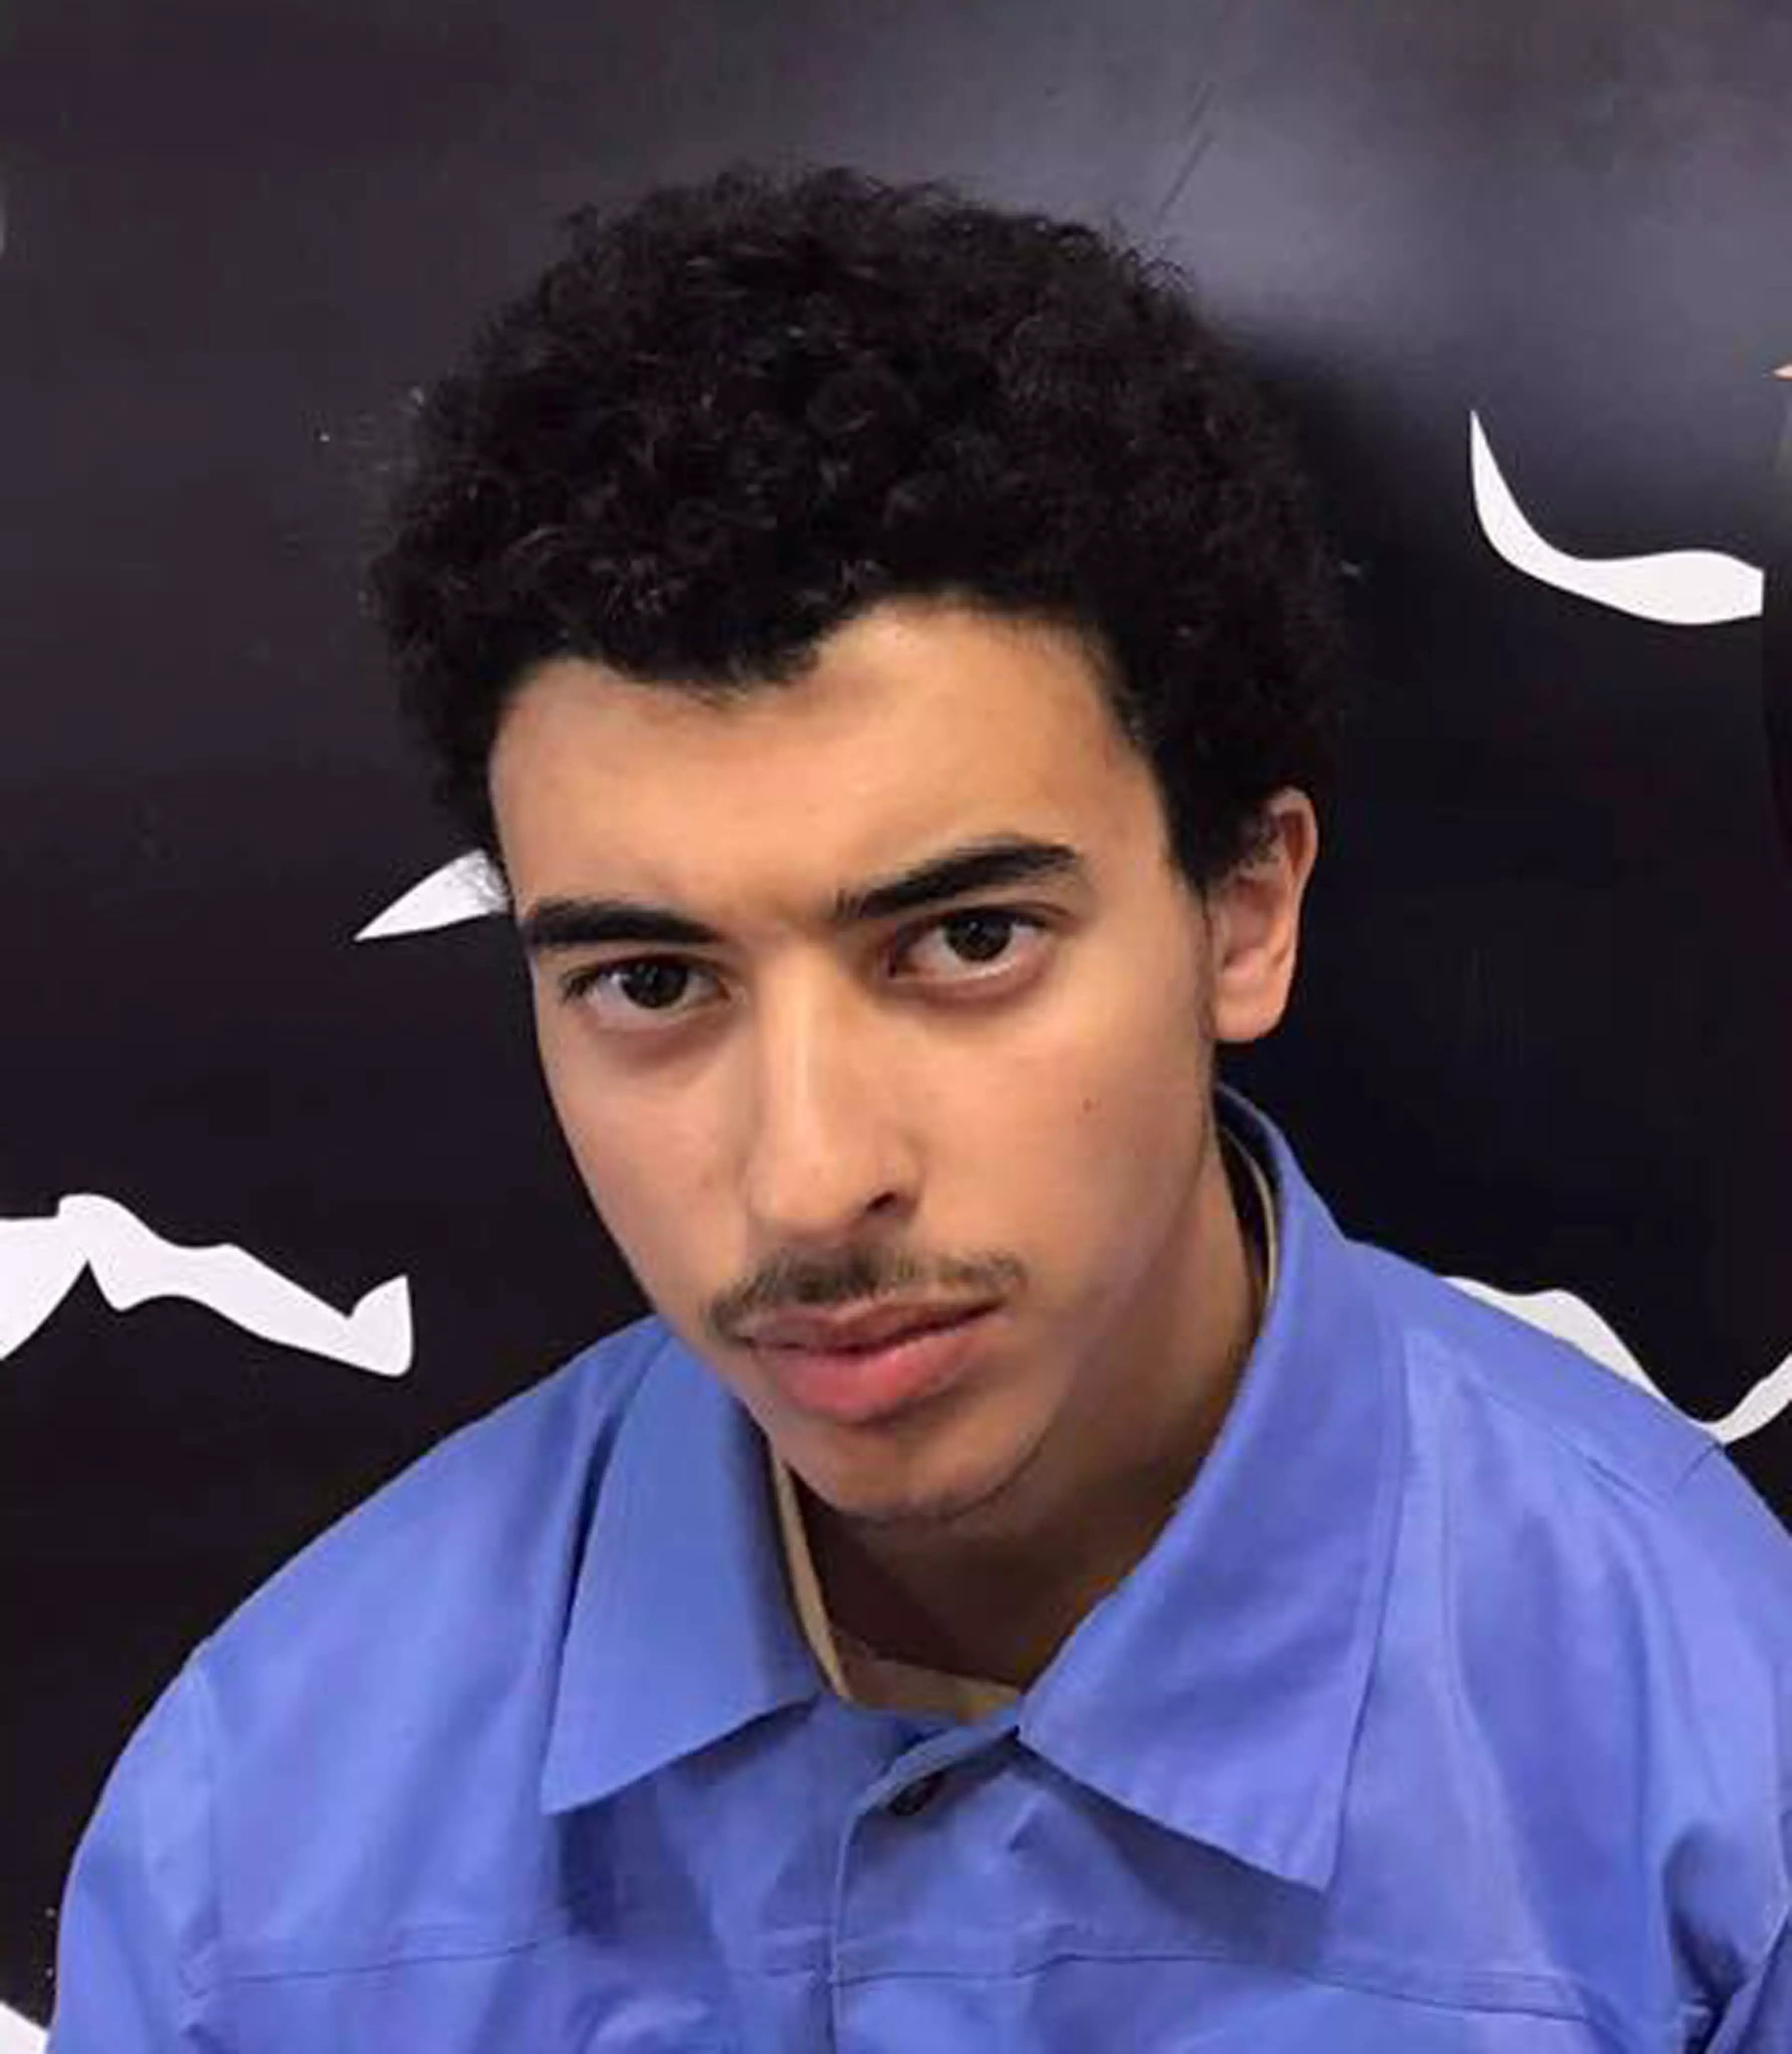 Hashem Abedi has been found guilty of murder (